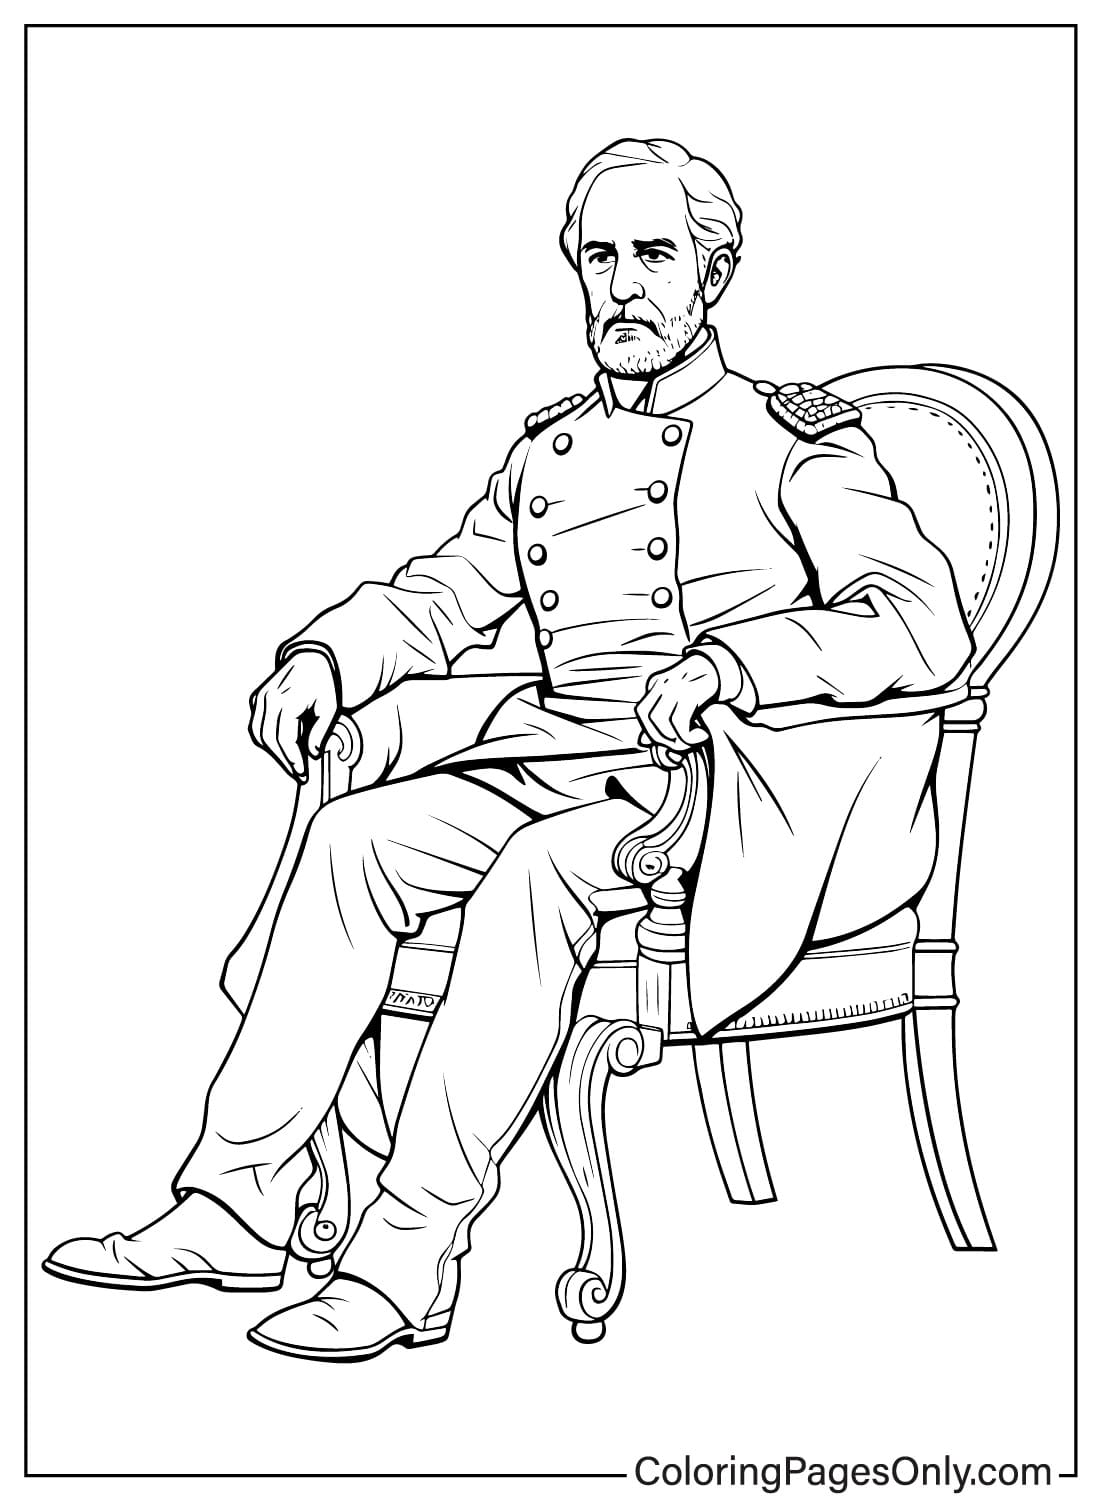 Robert E. Lee Coloring Page Free from Robert E. Lee